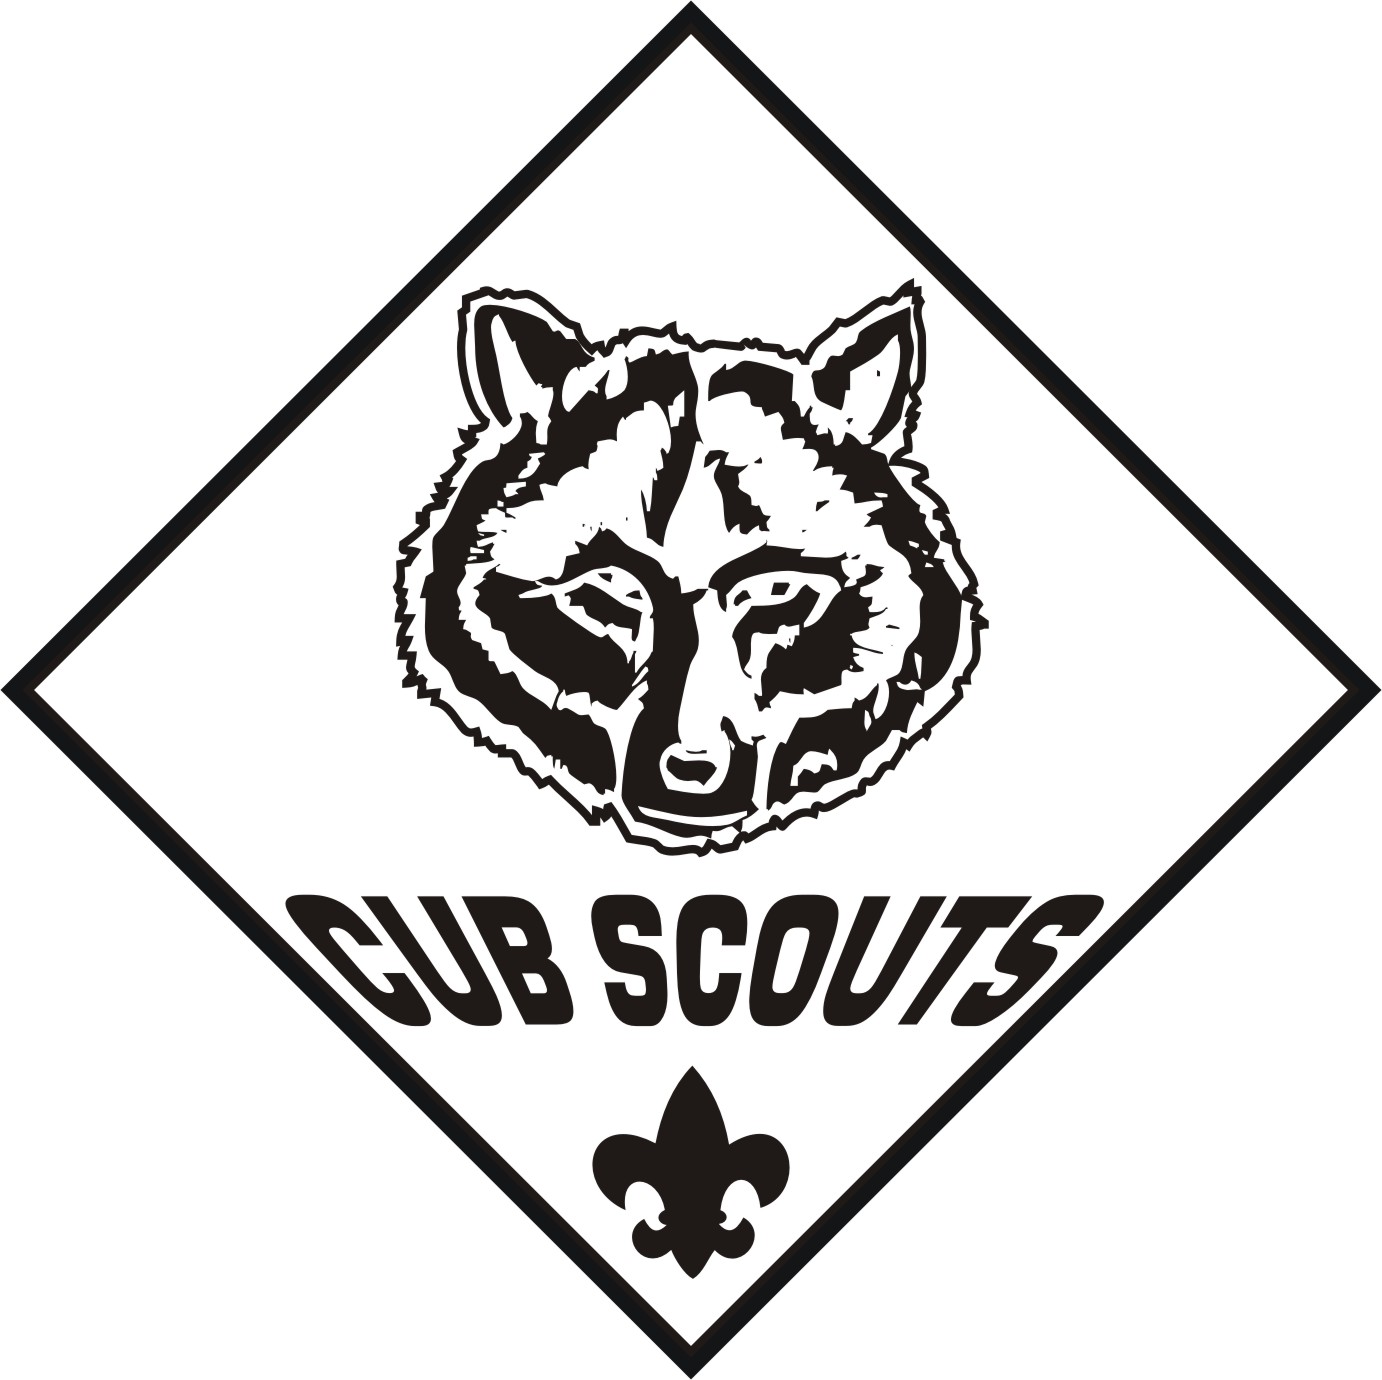 Download Cub Scout Logo Vector at Vectorified.com | Collection of Cub Scout Logo Vector free for personal use